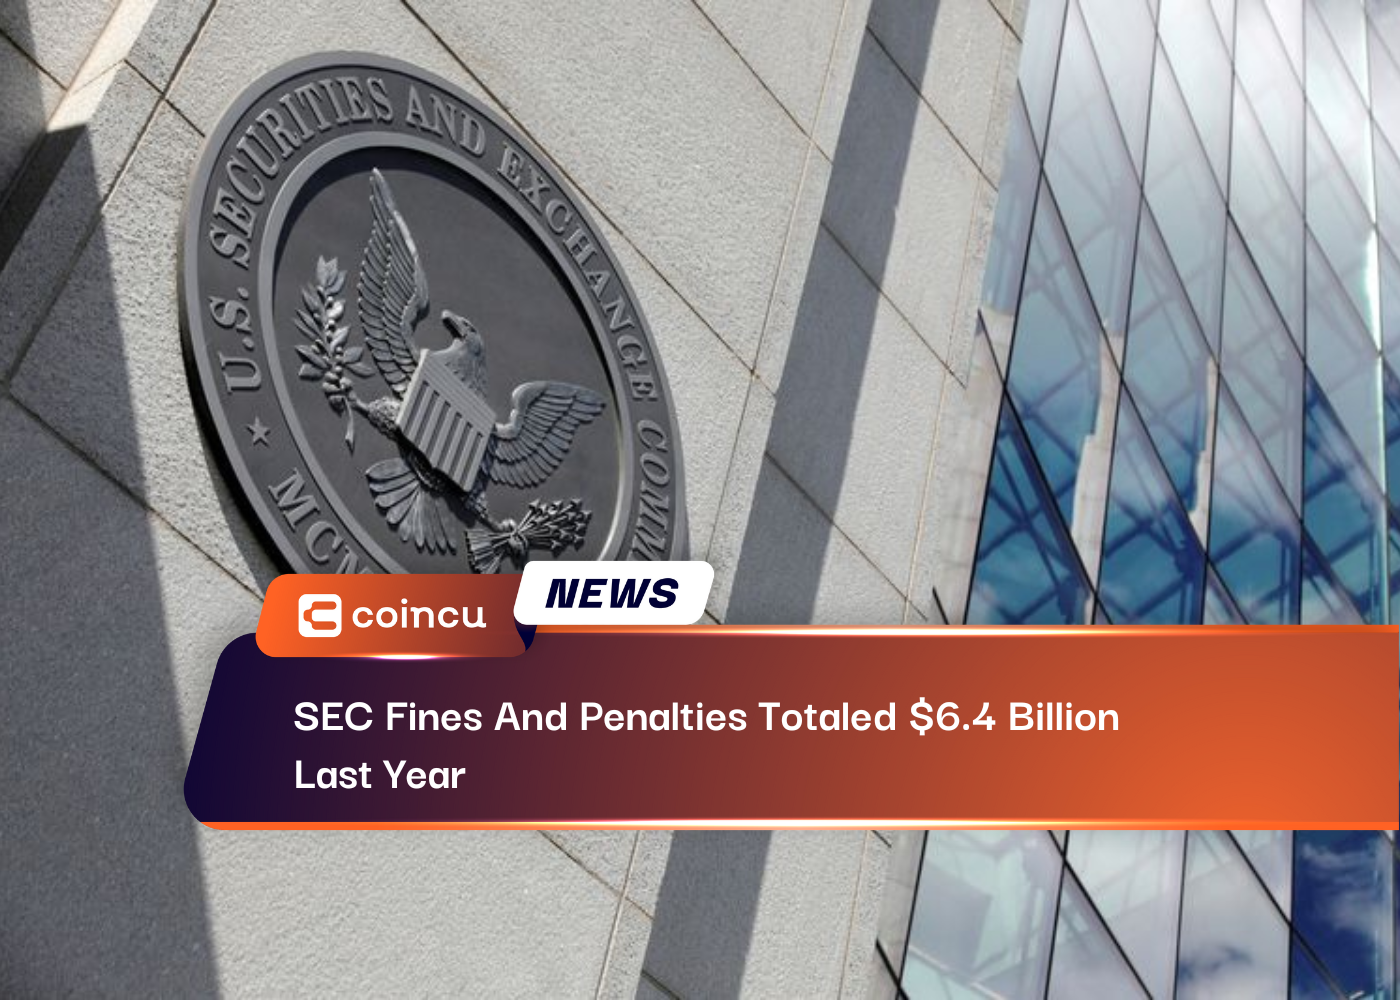 SEC Fines And Penalties Totaled 6.4 Billion